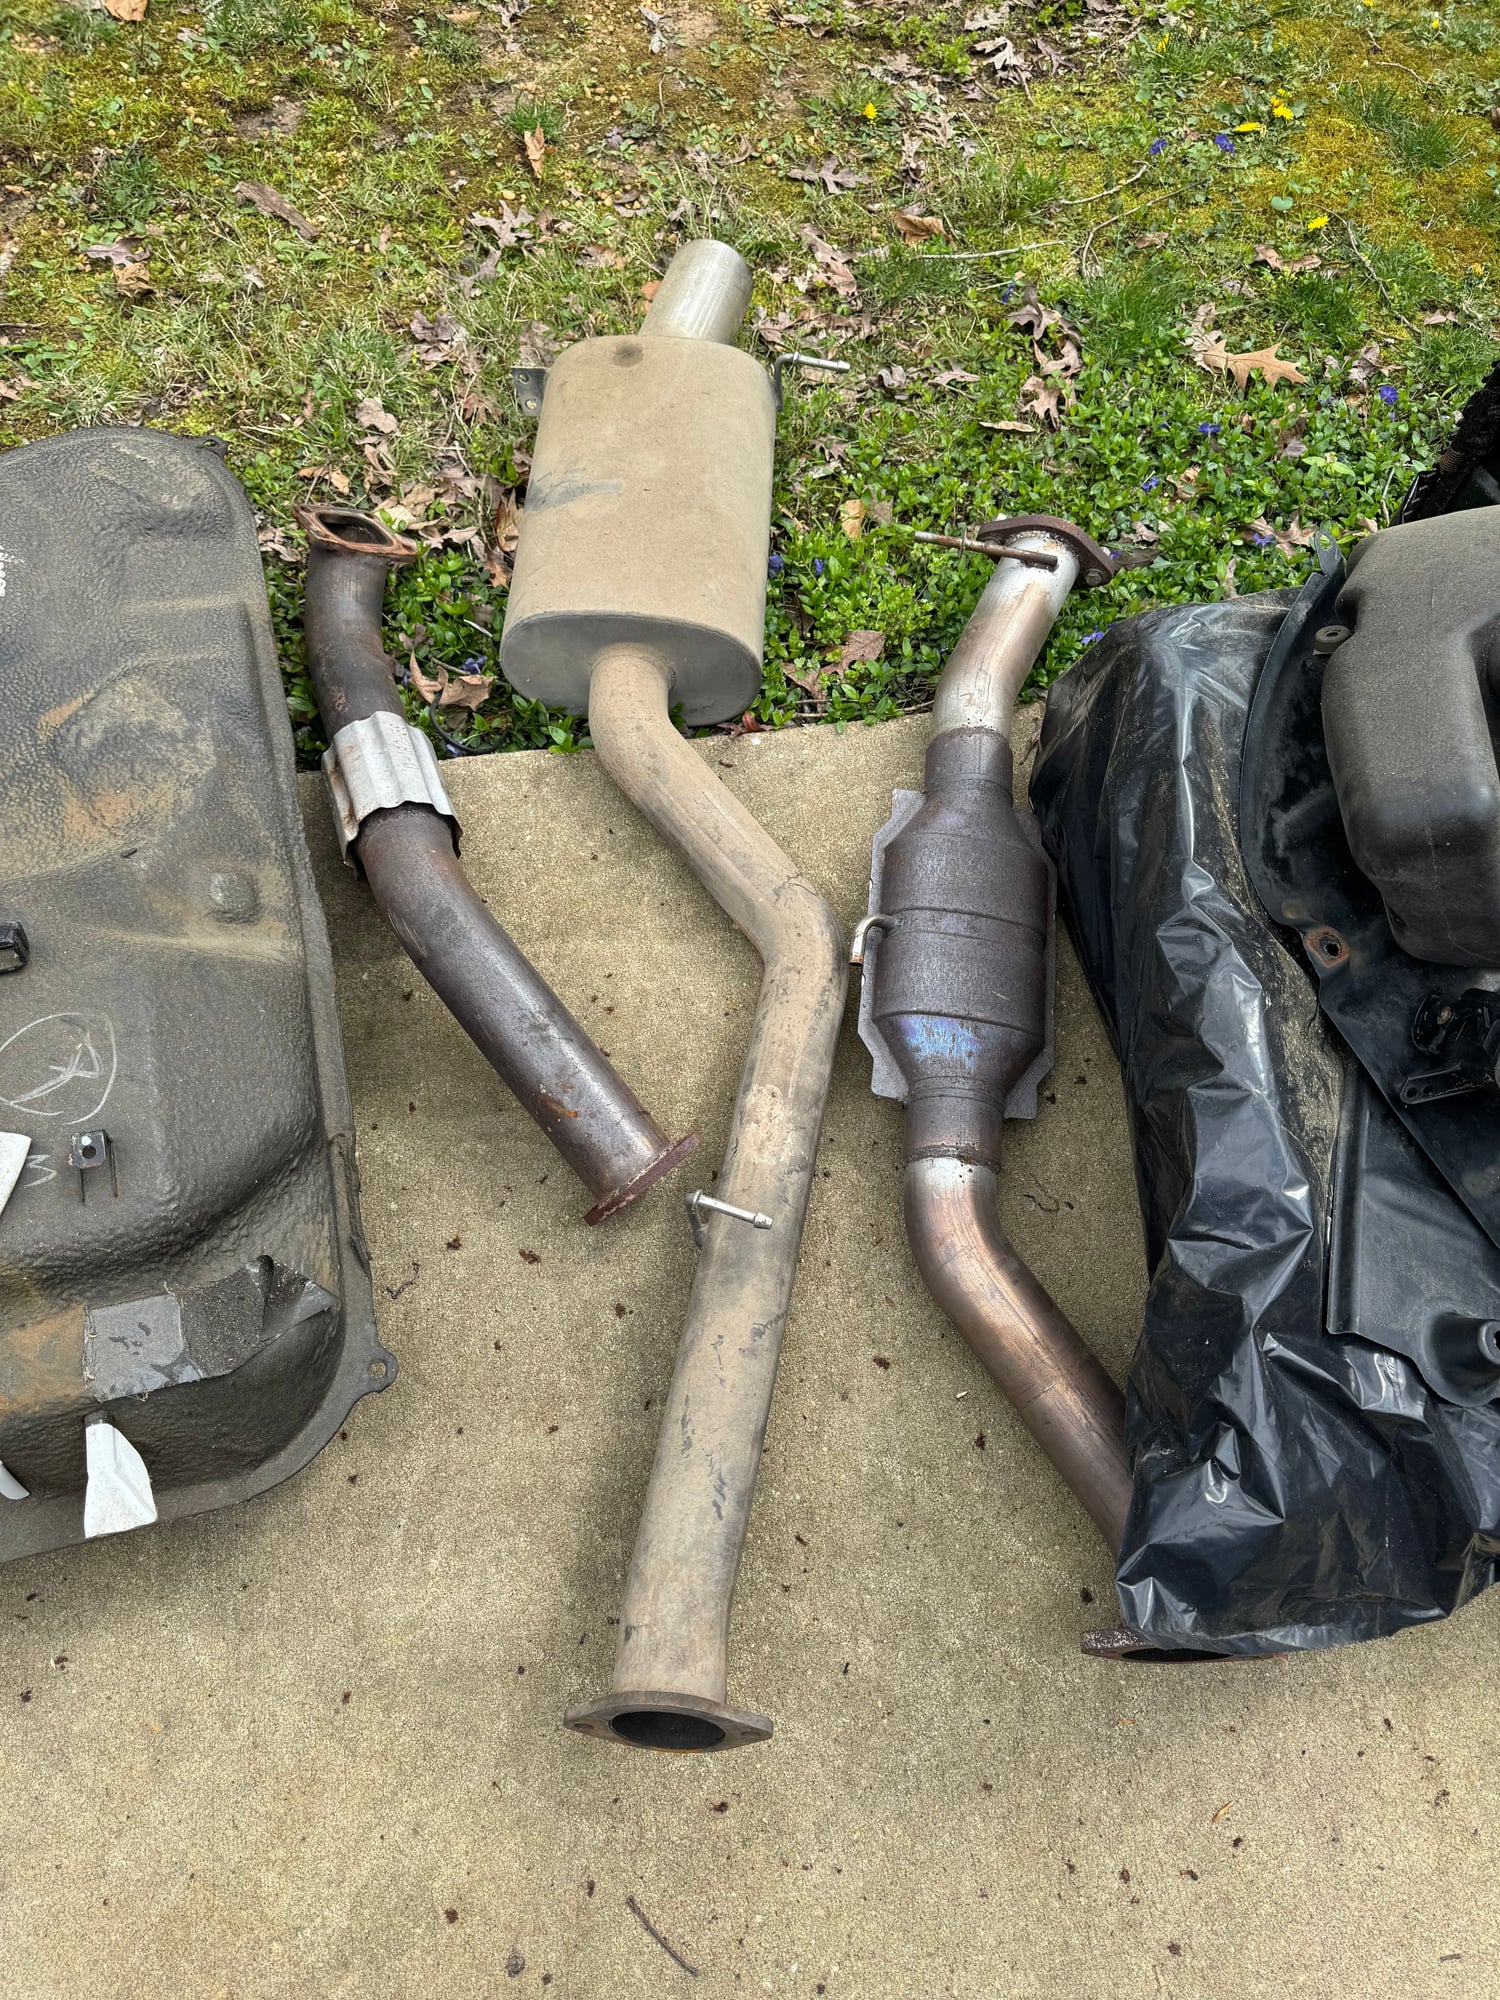 Engine - Exhaust - PFS exhaust plus down pipe and cat (not PFS) - Used - 1993 to 1996 Mazda RX-7 - Leonardtown, MD 20650, United States